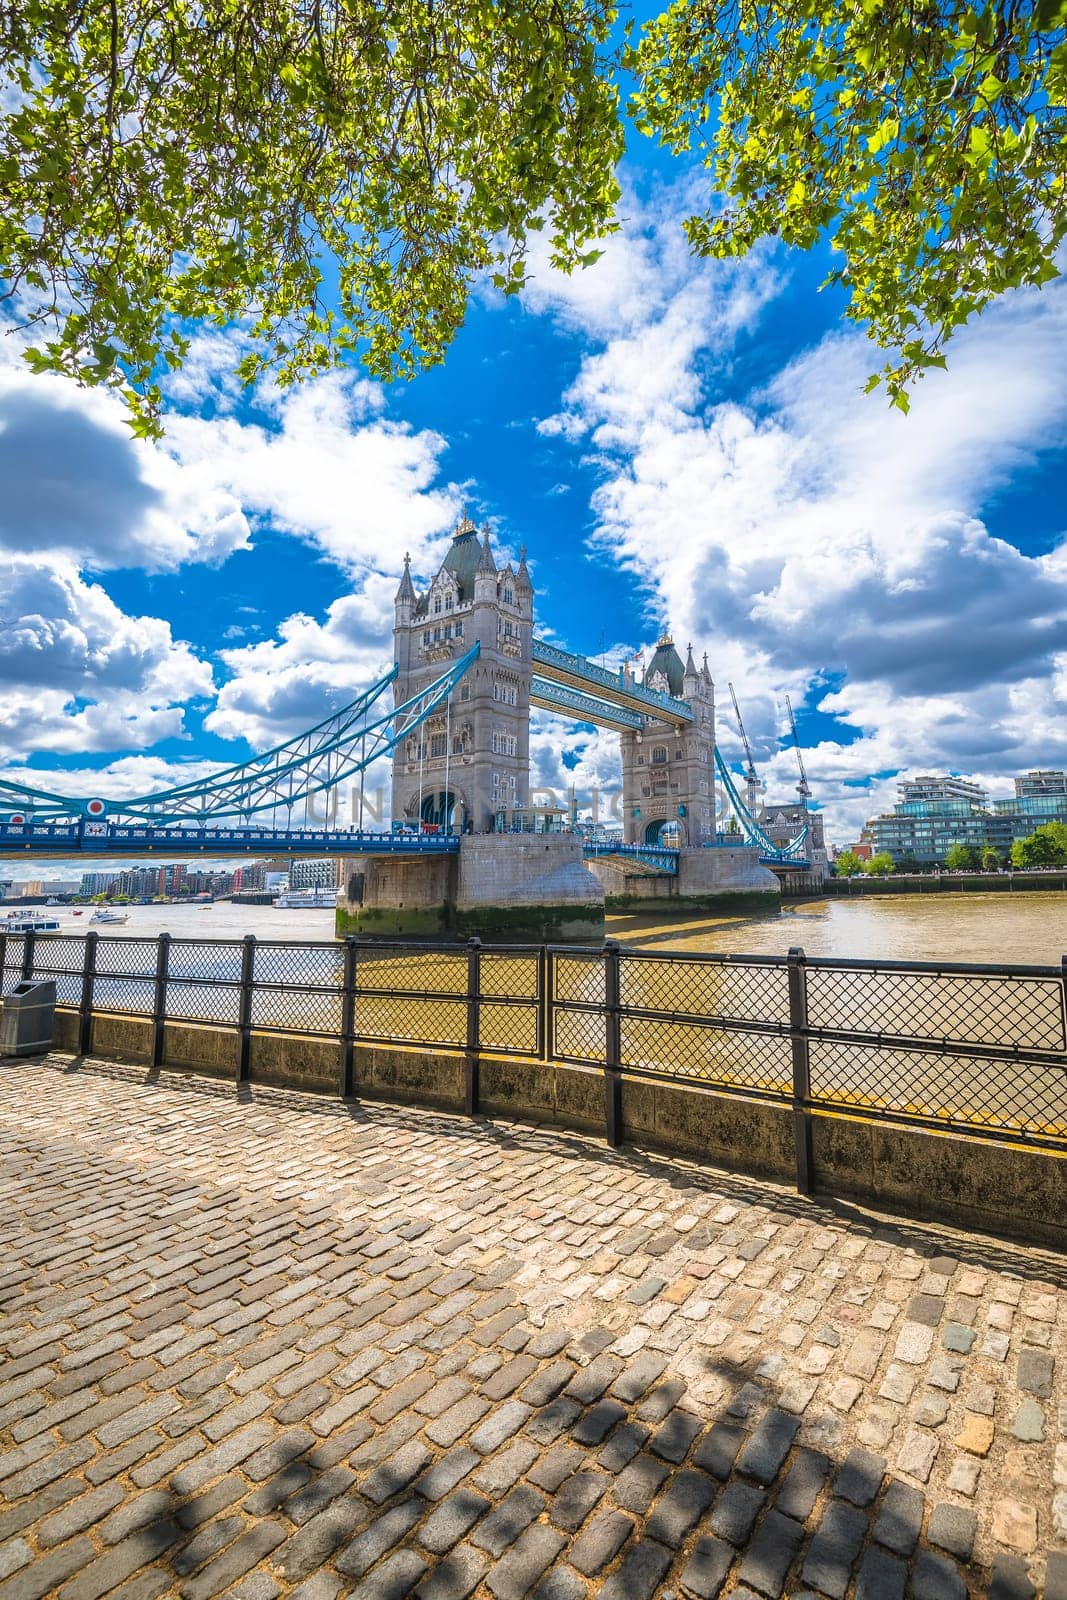 Tower Bridge and Thamse river in London street view by xbrchx